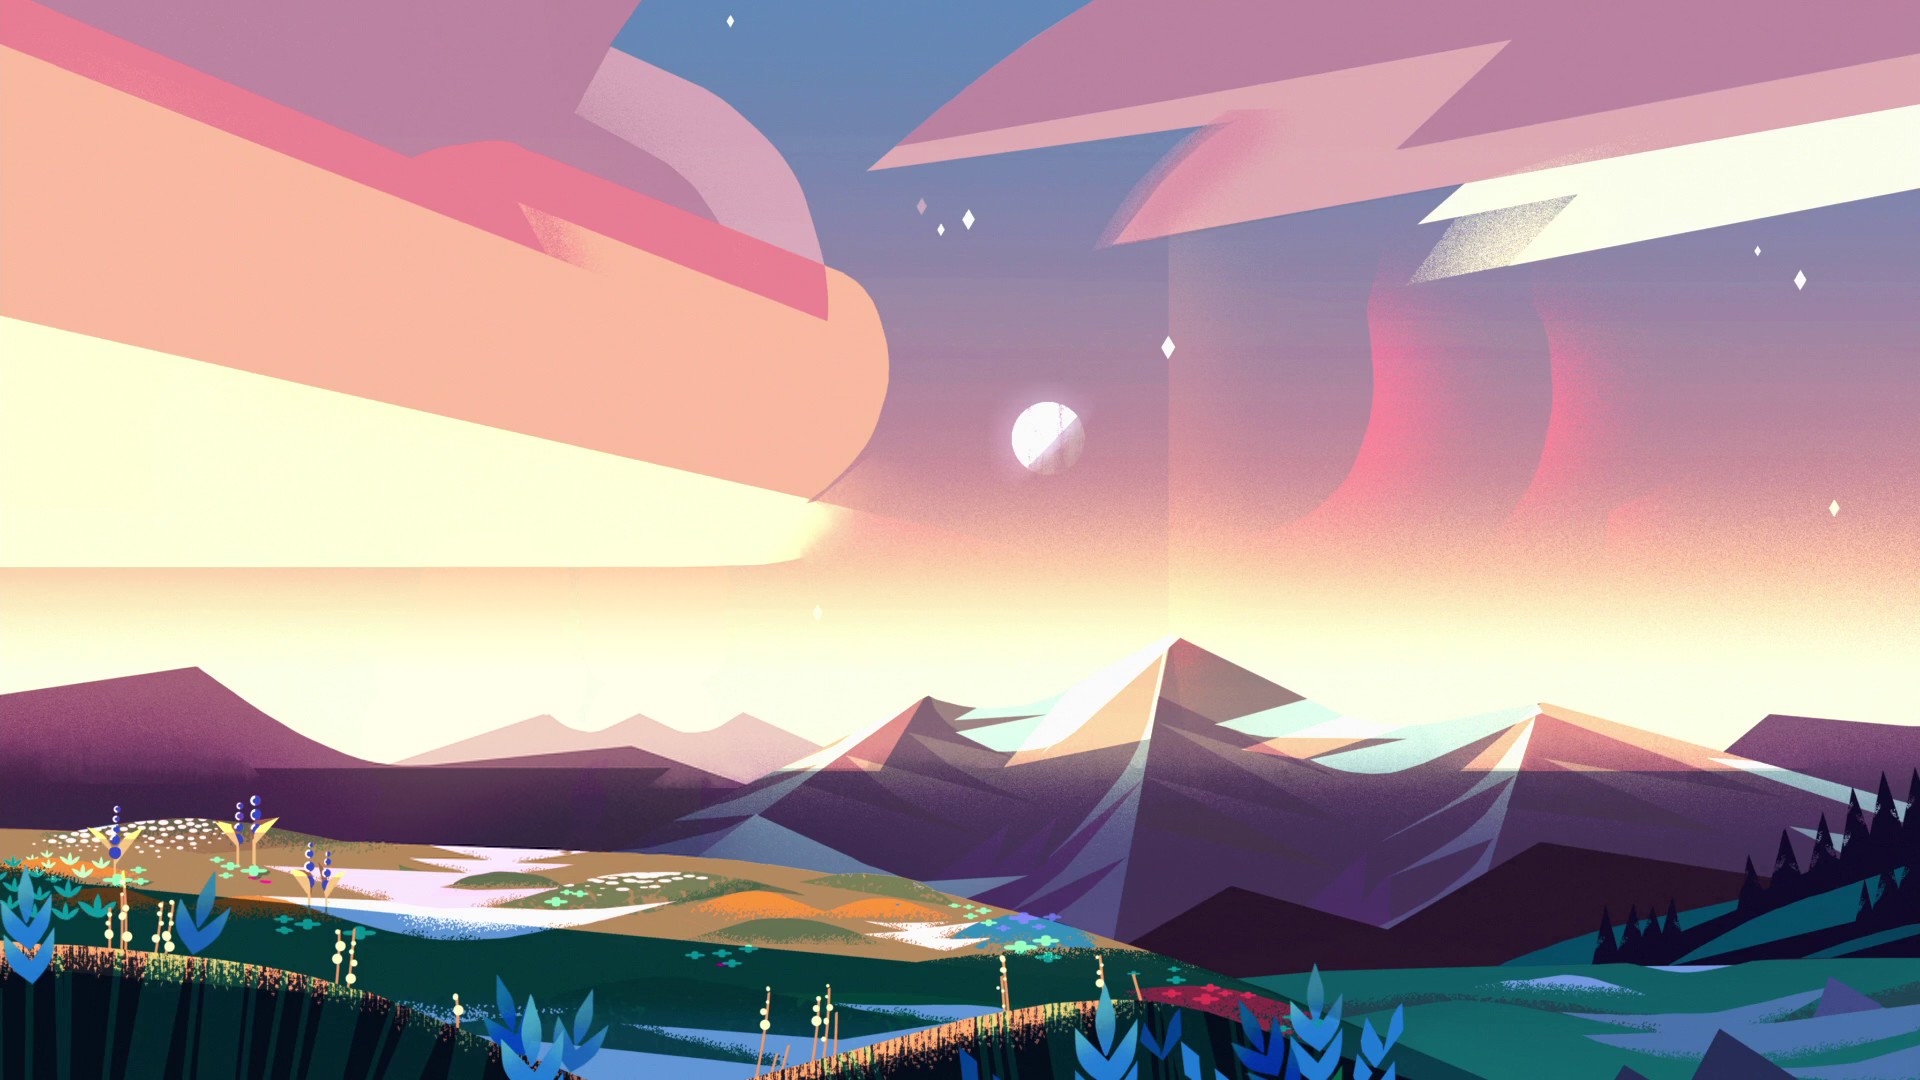 Desktop Wallpaper Steven Universe The Movie with high-resolution 1920x1080 pixel. You can use this wallpaper for your Windows and Mac OS computers as well as your Android and iPhone smartphones